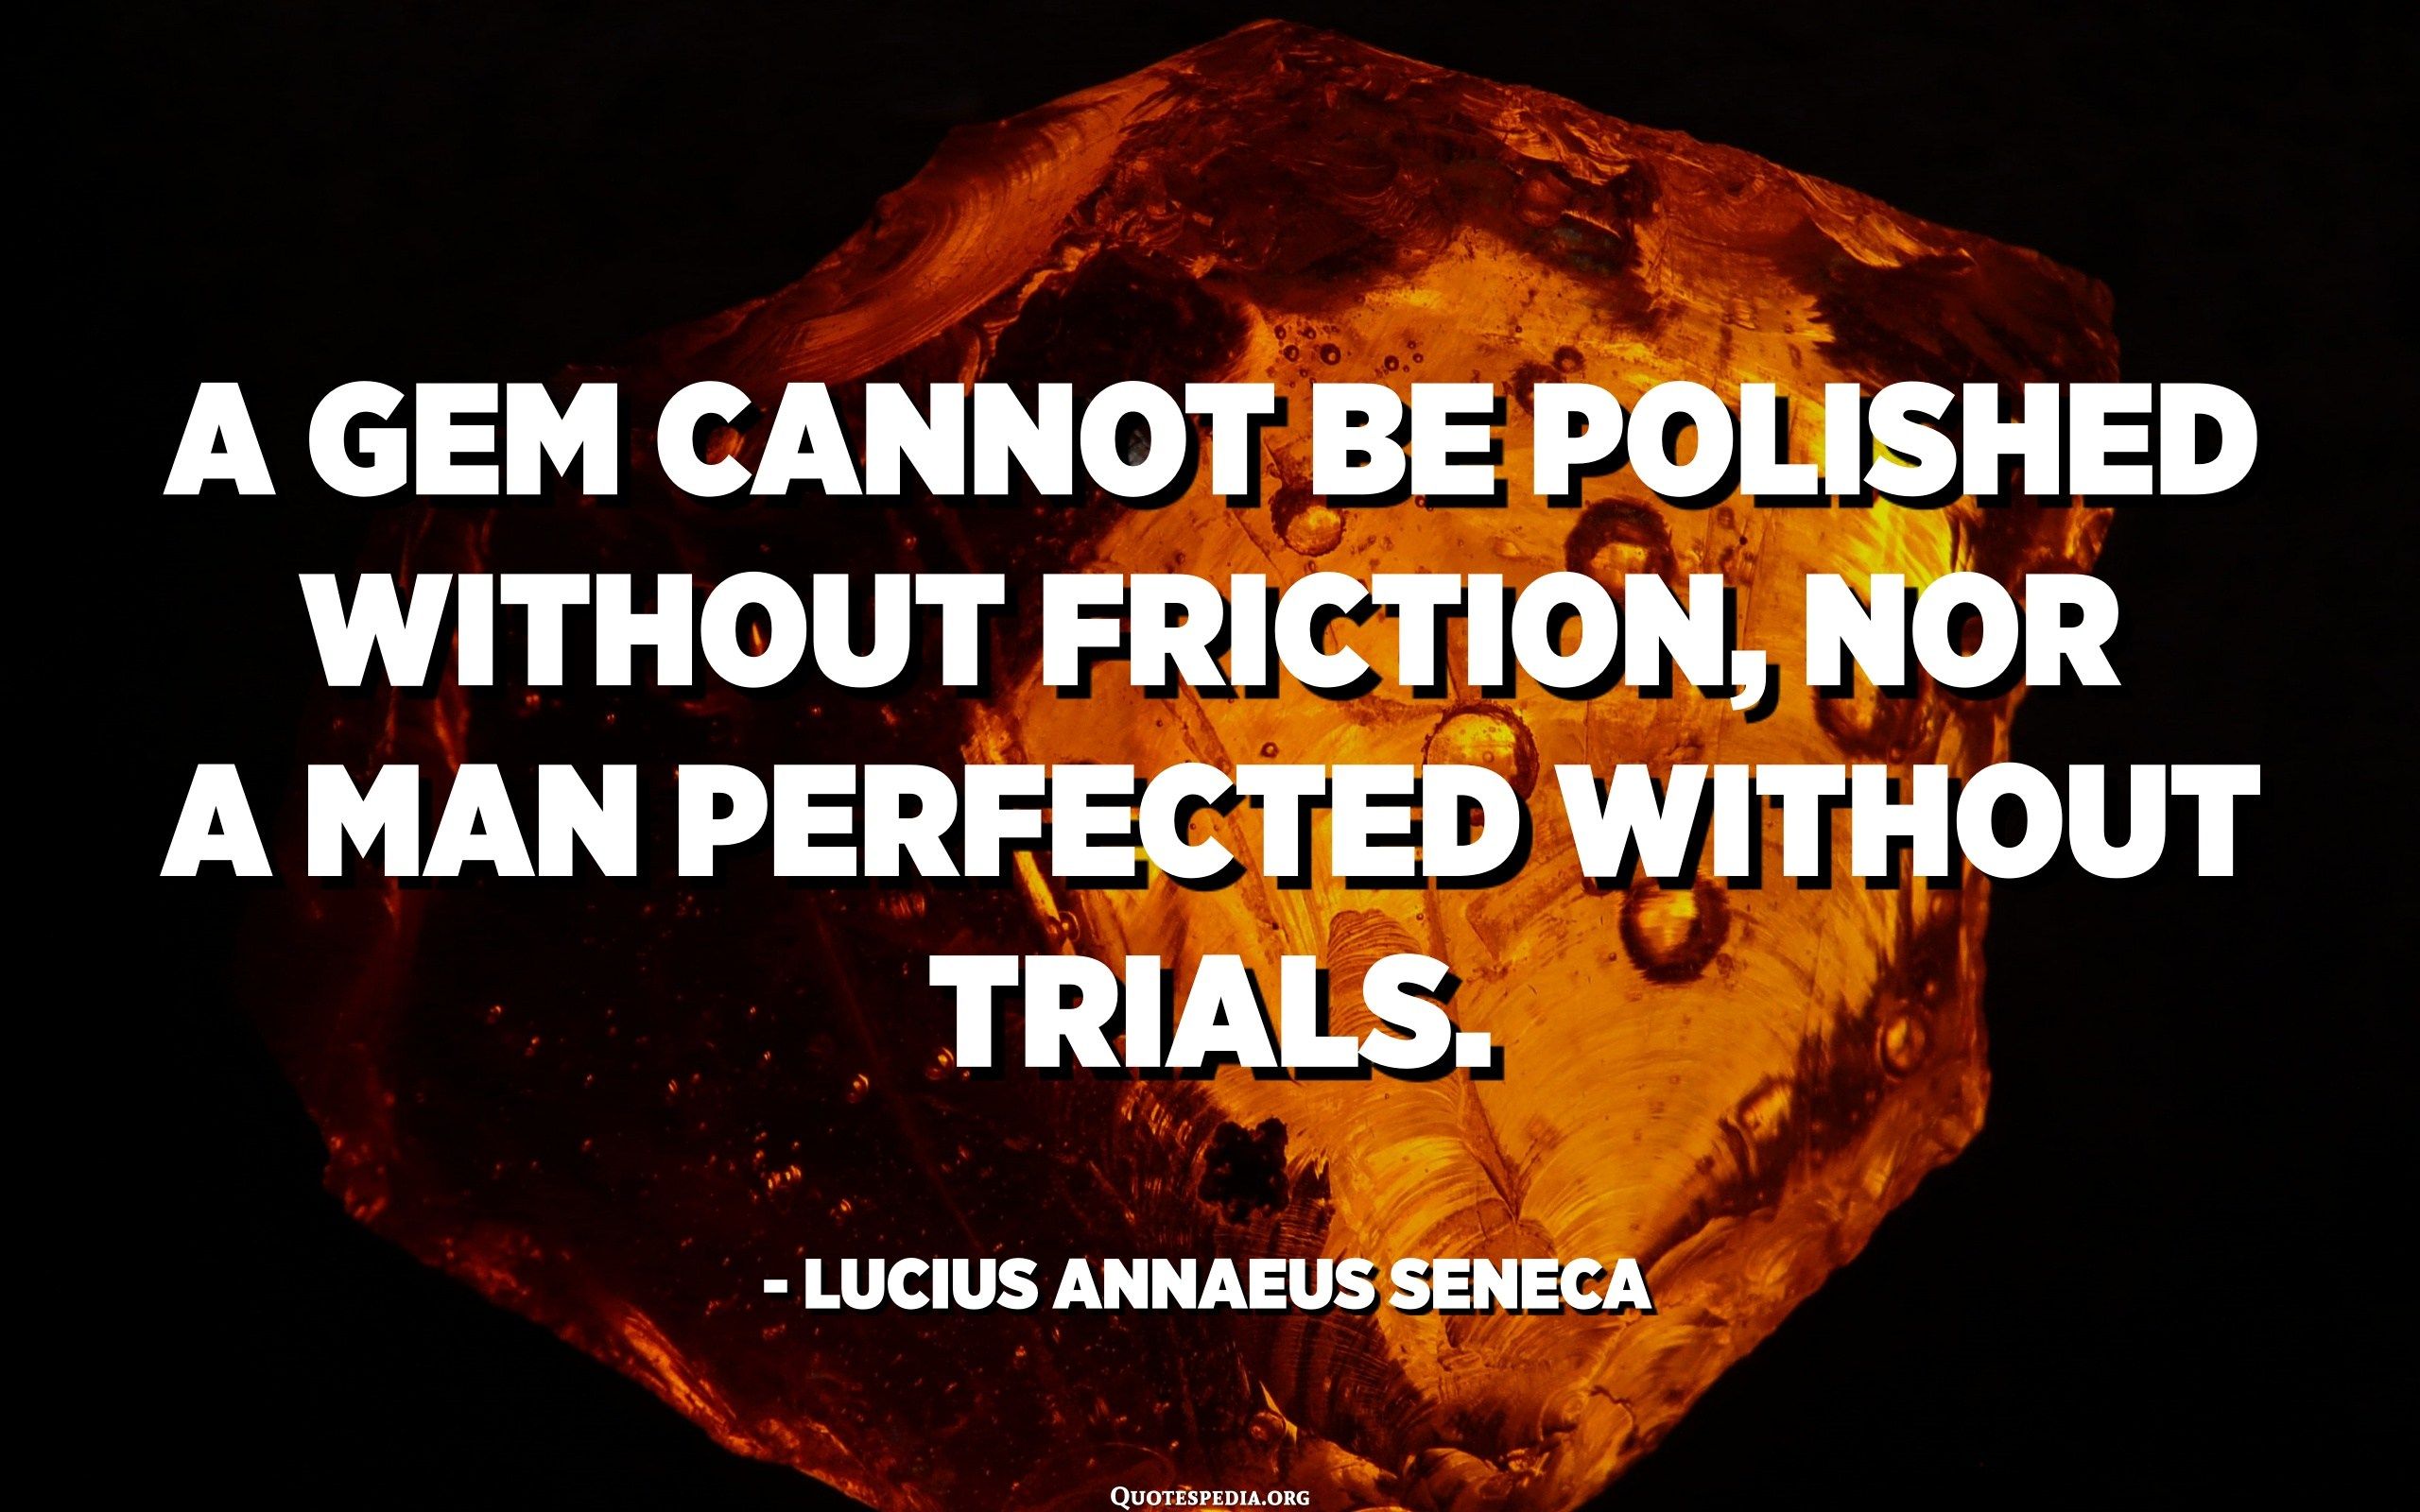 A gem cannot be polished without friction, nor a man perfected without trials. Annaeus Seneca